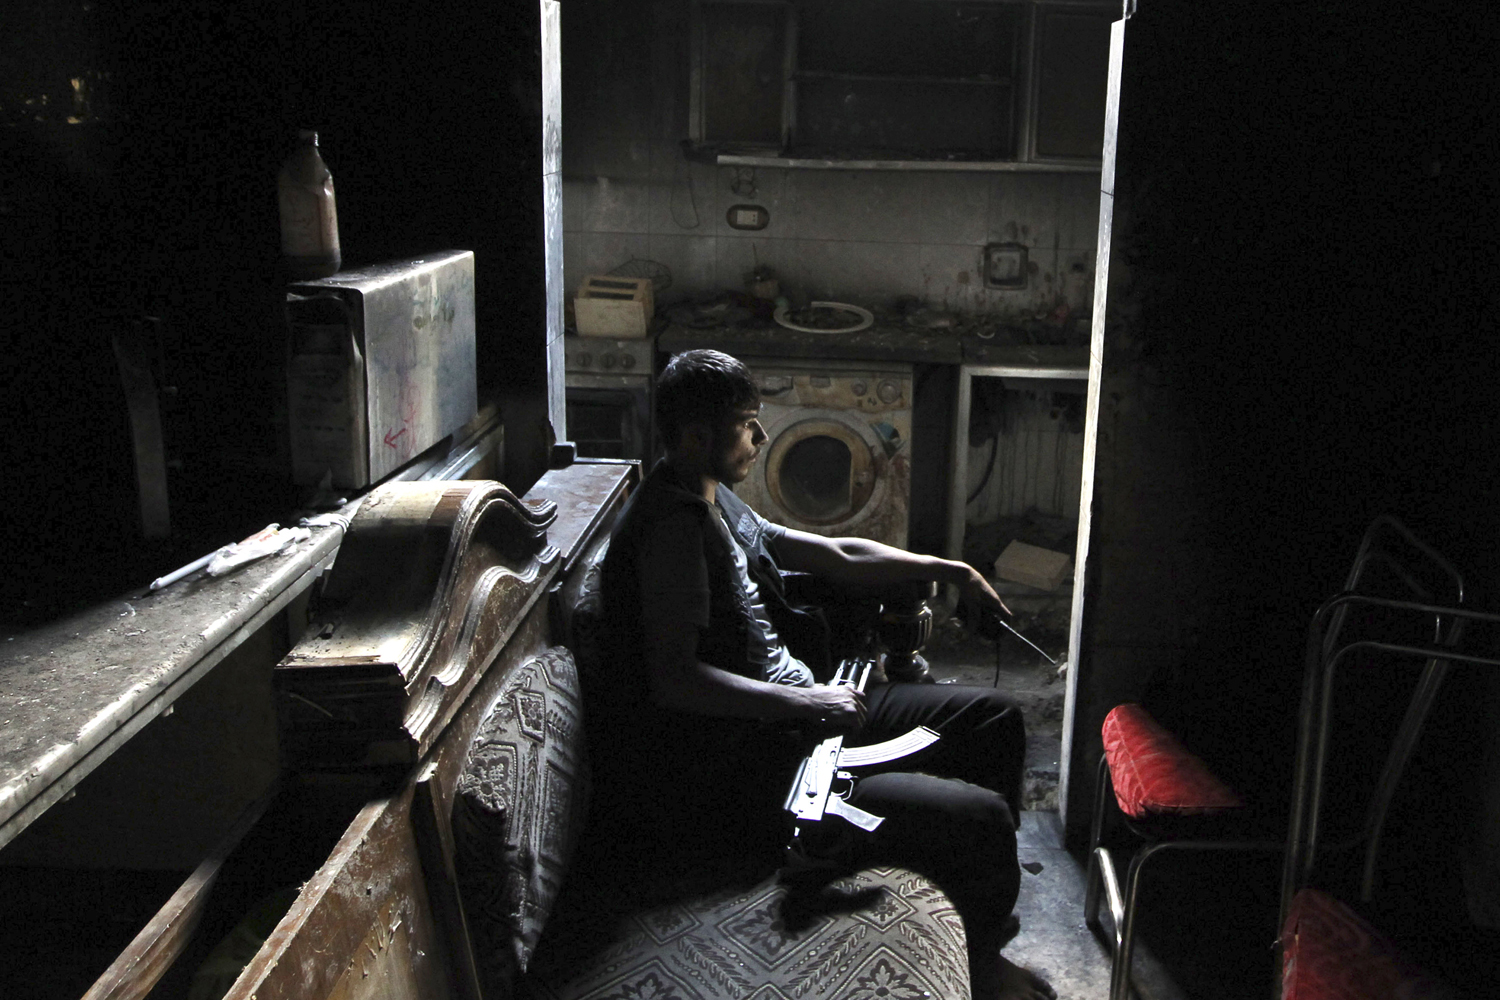 A member of the Free Syrian Army sits with his weapon inside a house in Aleppo's al-Sayyid Ali neighborhood